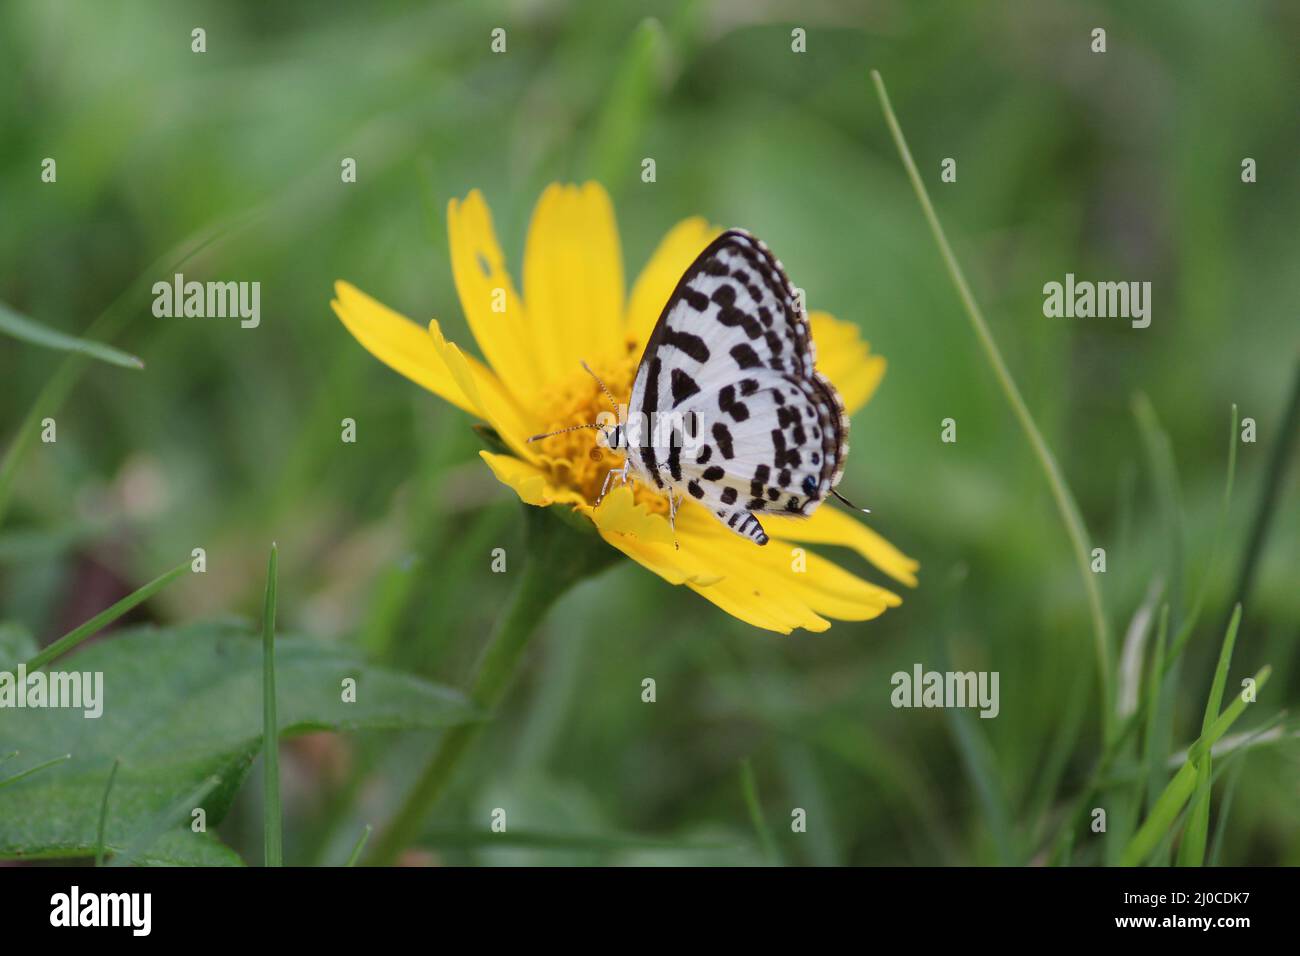 A little white butterfly on a yellow flower Stock Photo